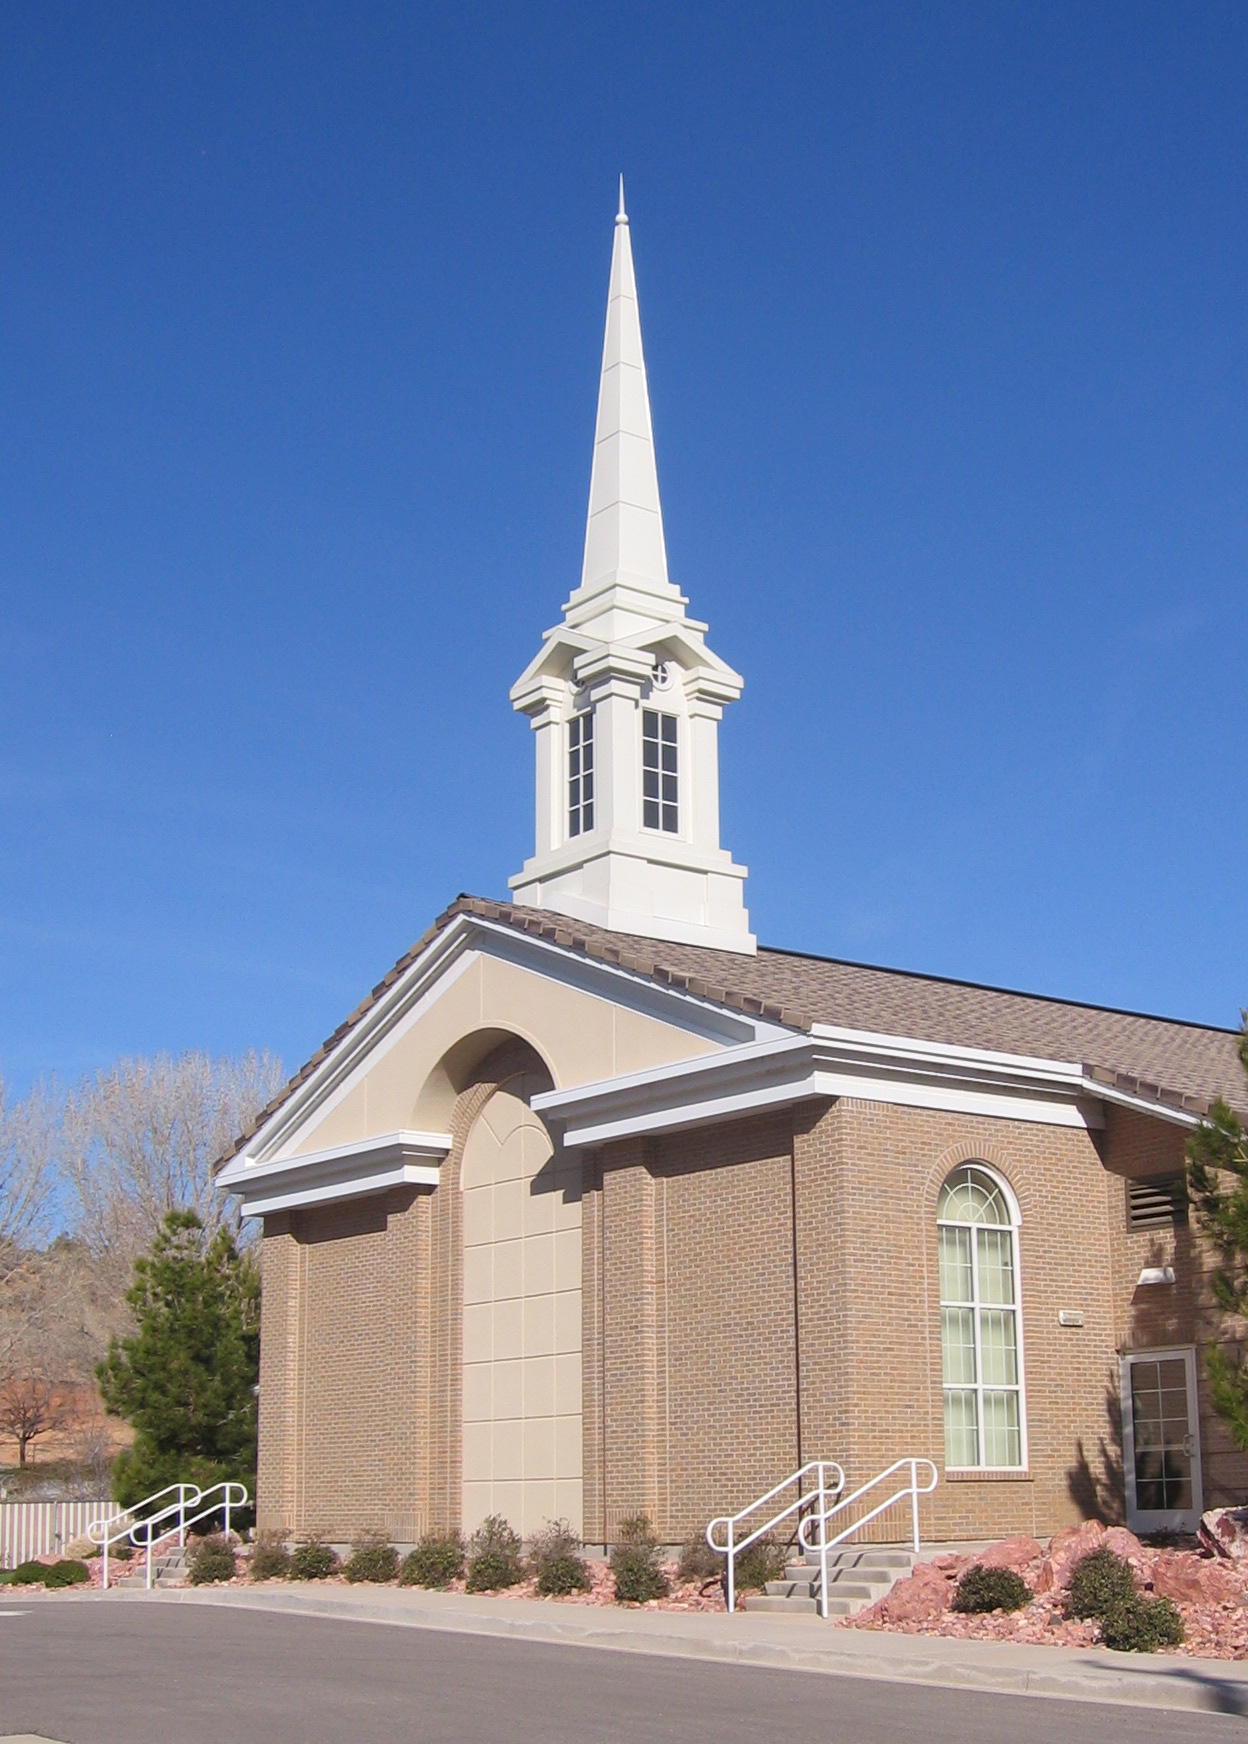 Front of the new Gunlock church building